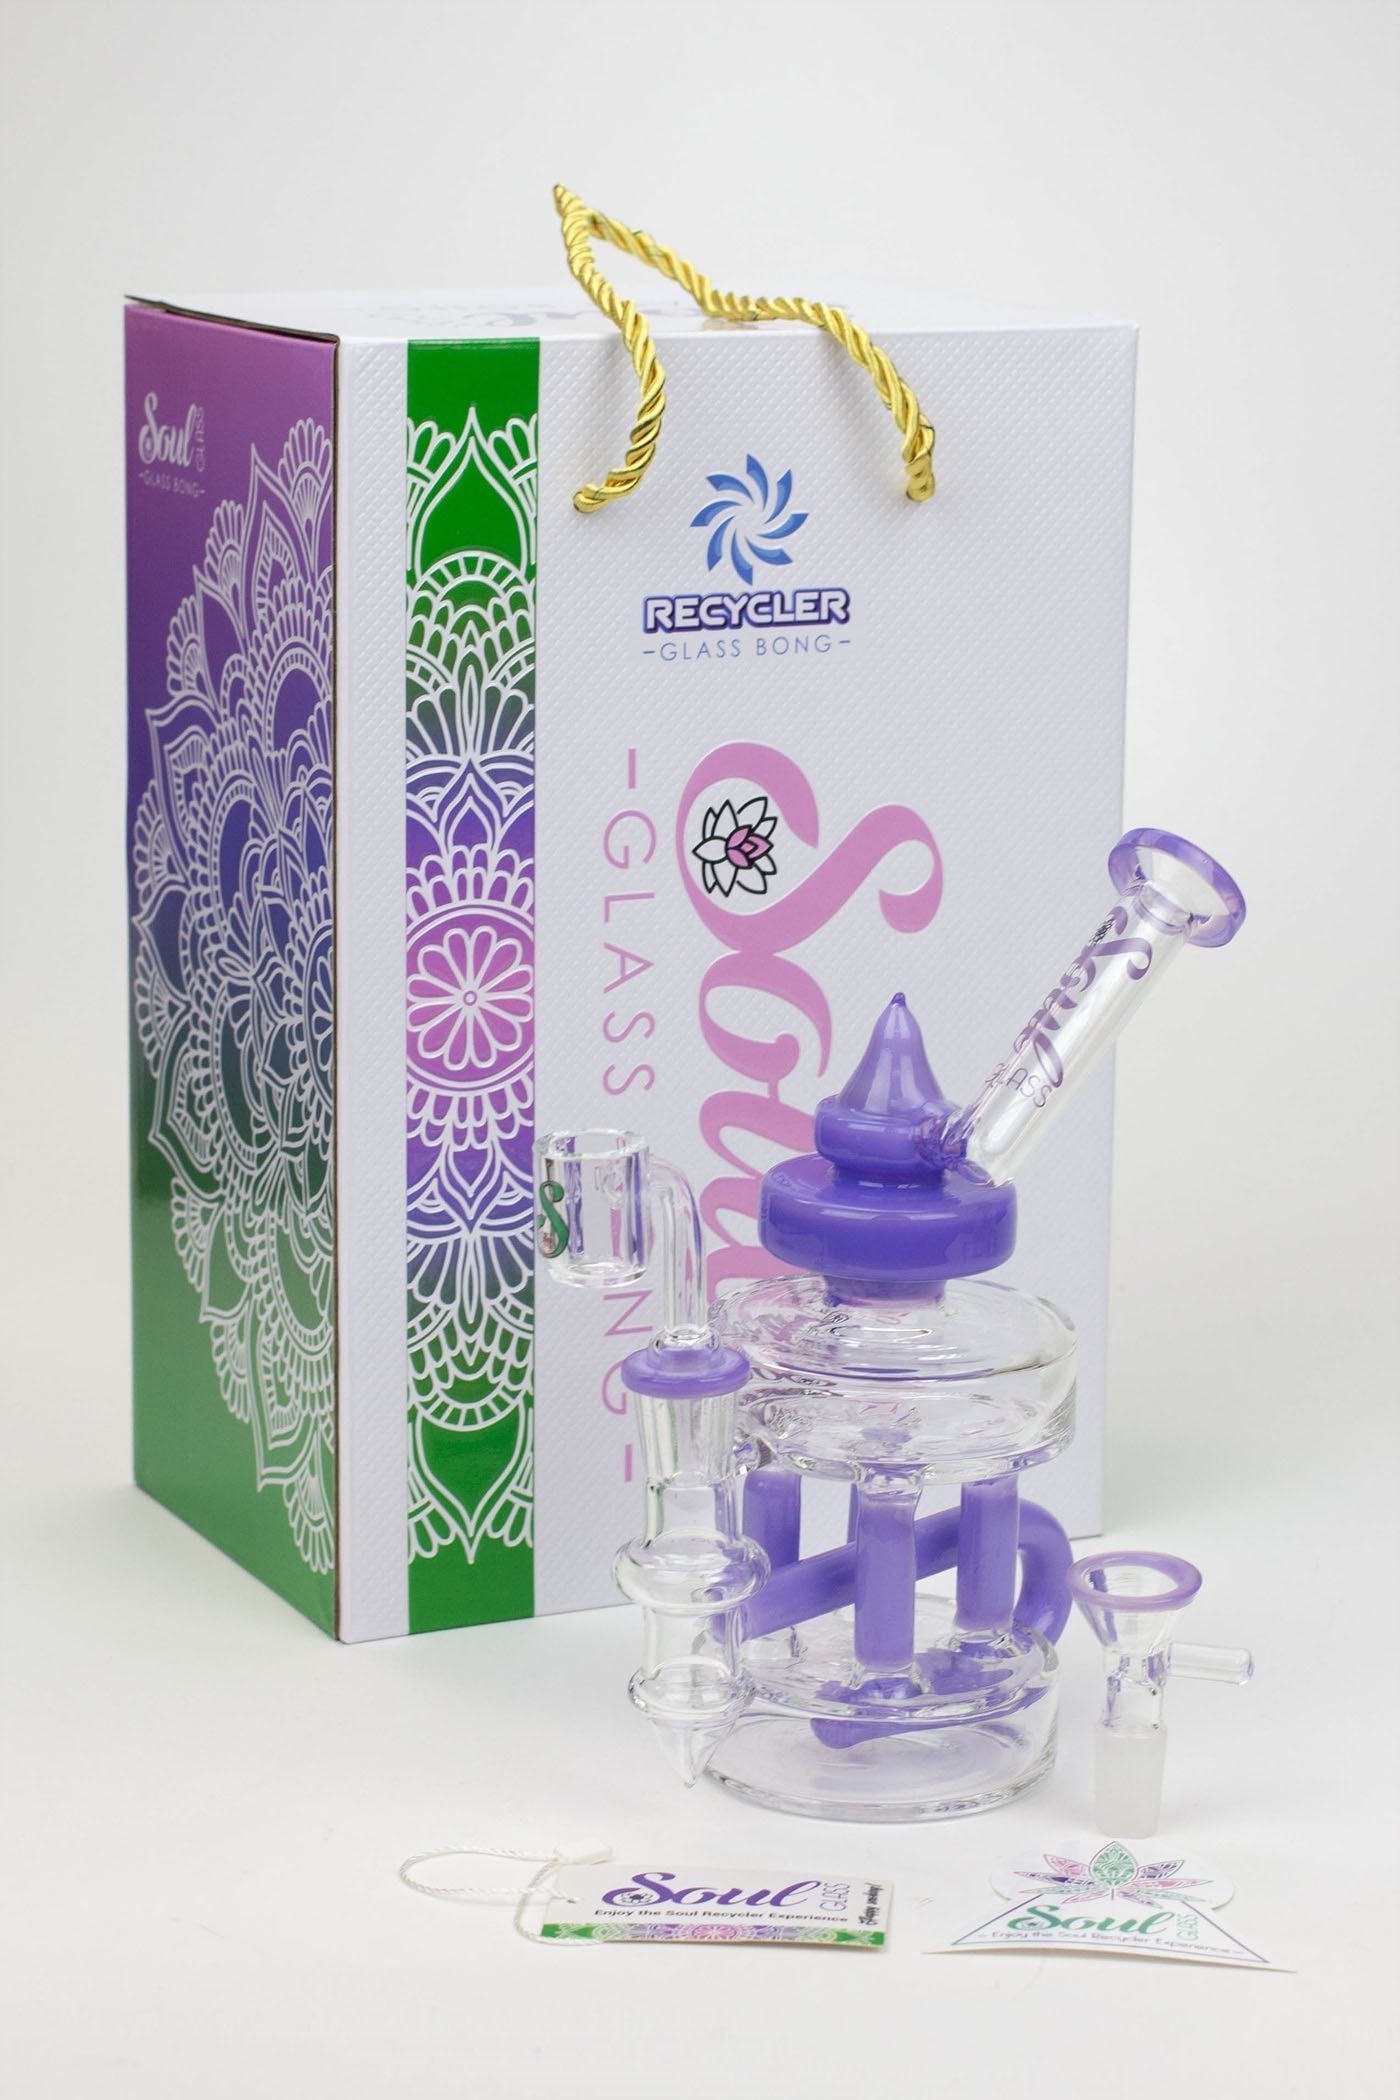 7" SOUL Glass 2-in-1 Double deck recycler bong_3